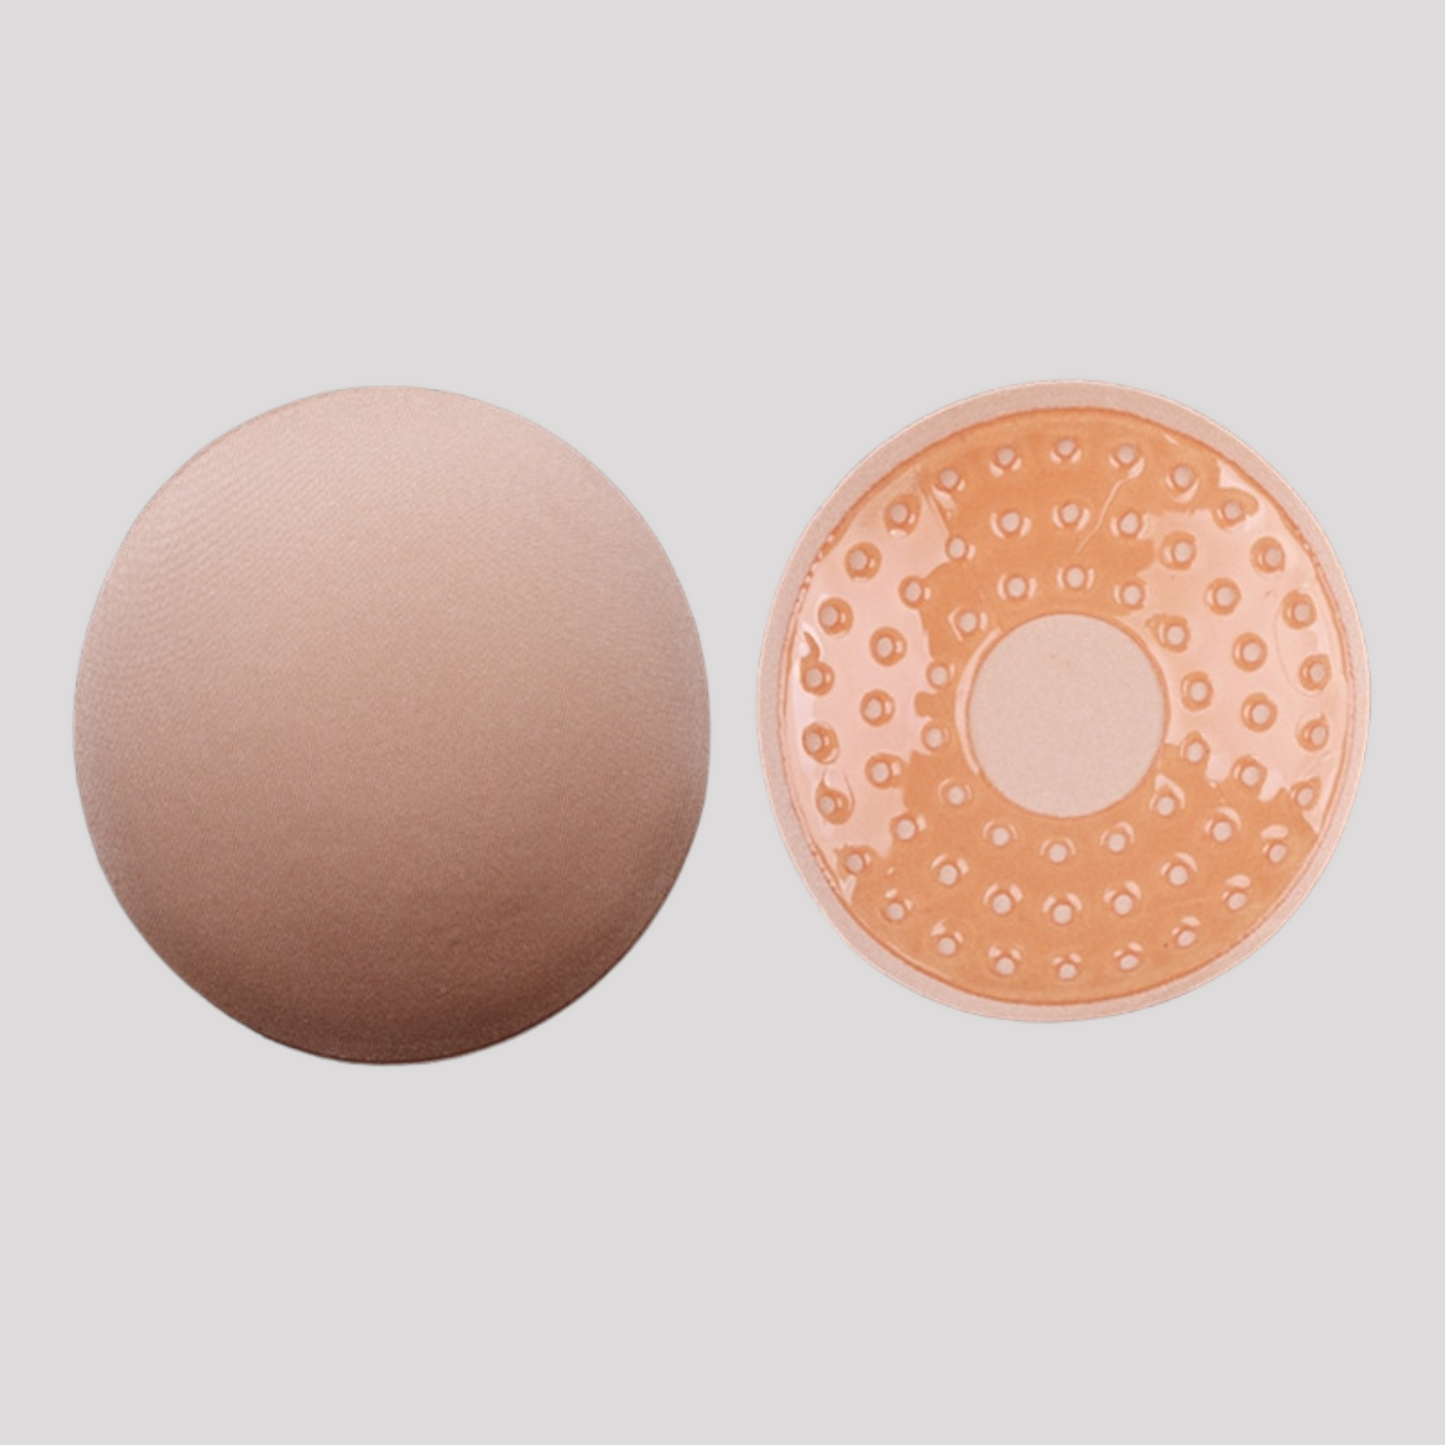 Reusable Self-Adhesive Nipple Cover - Fabric Covered